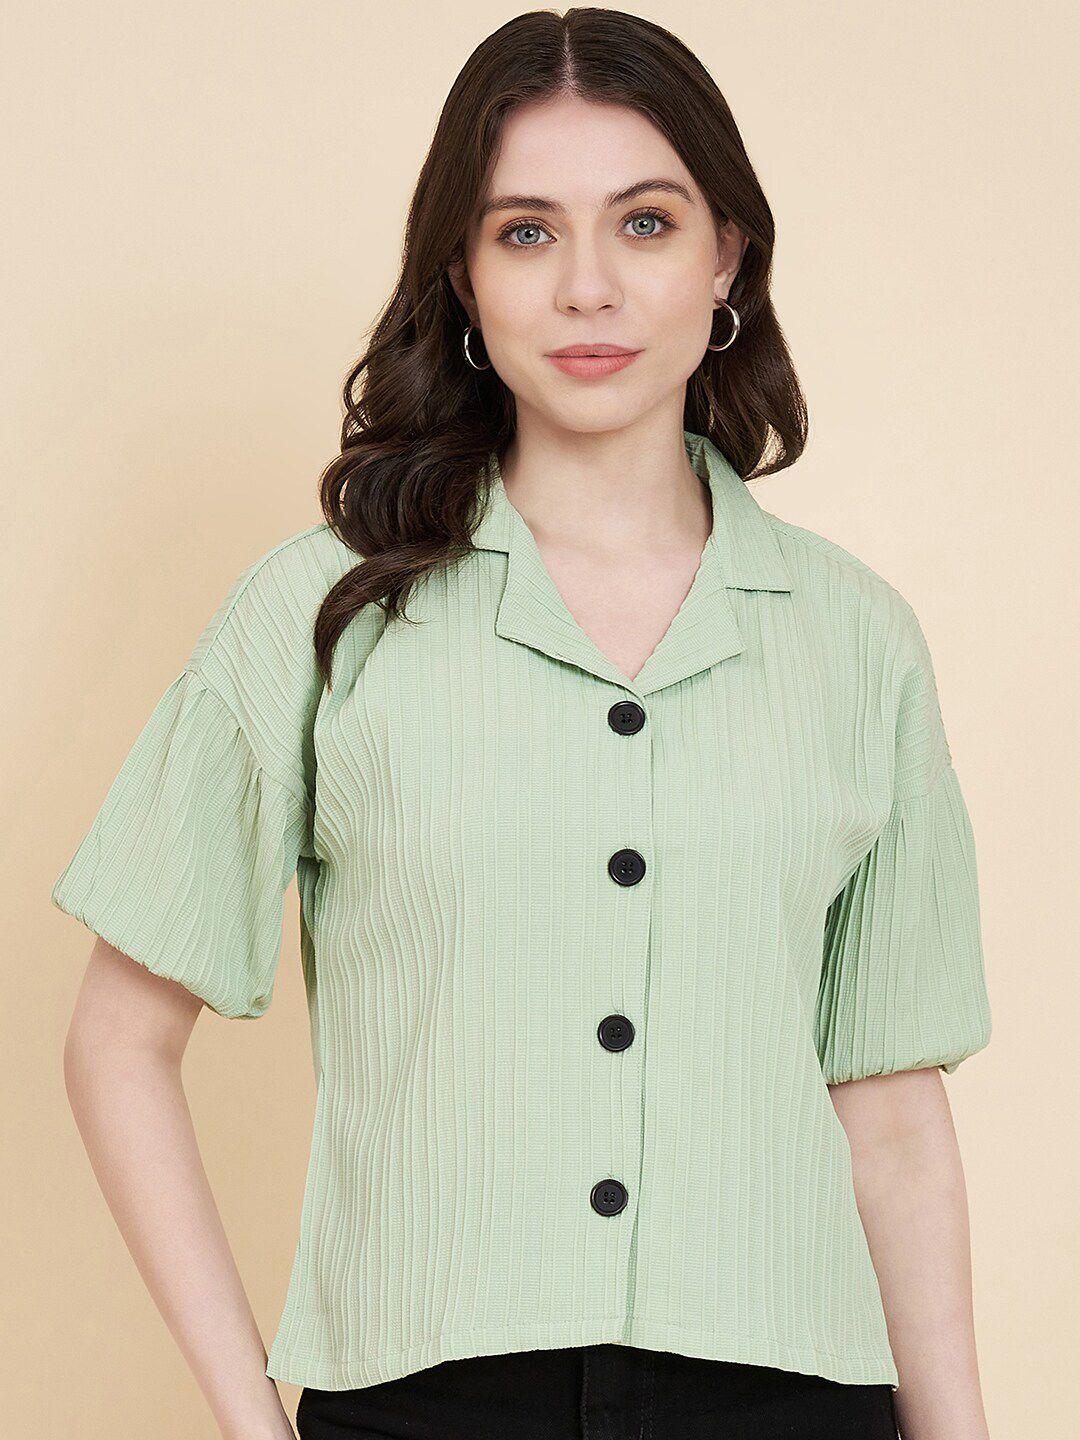 vairagee-women-olive-green-classic-boxy-striped-casual-shirt